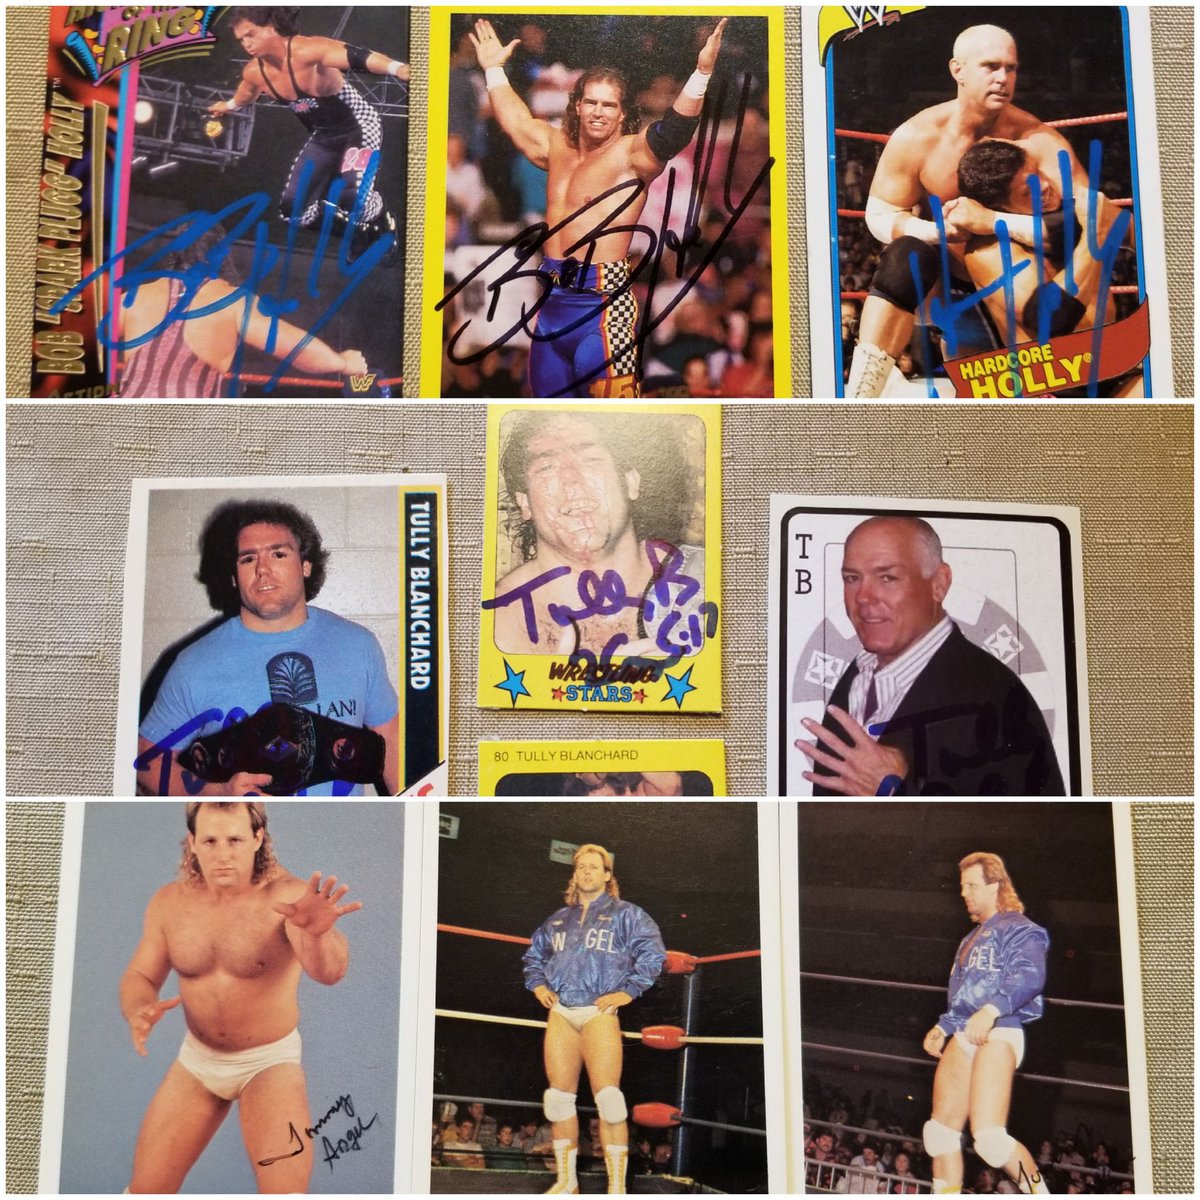 New post about my new signed cards!  #bobholly #tullyblanchard #tommyangel 
thewrestlinginsomniac.com/2020/05/signed…